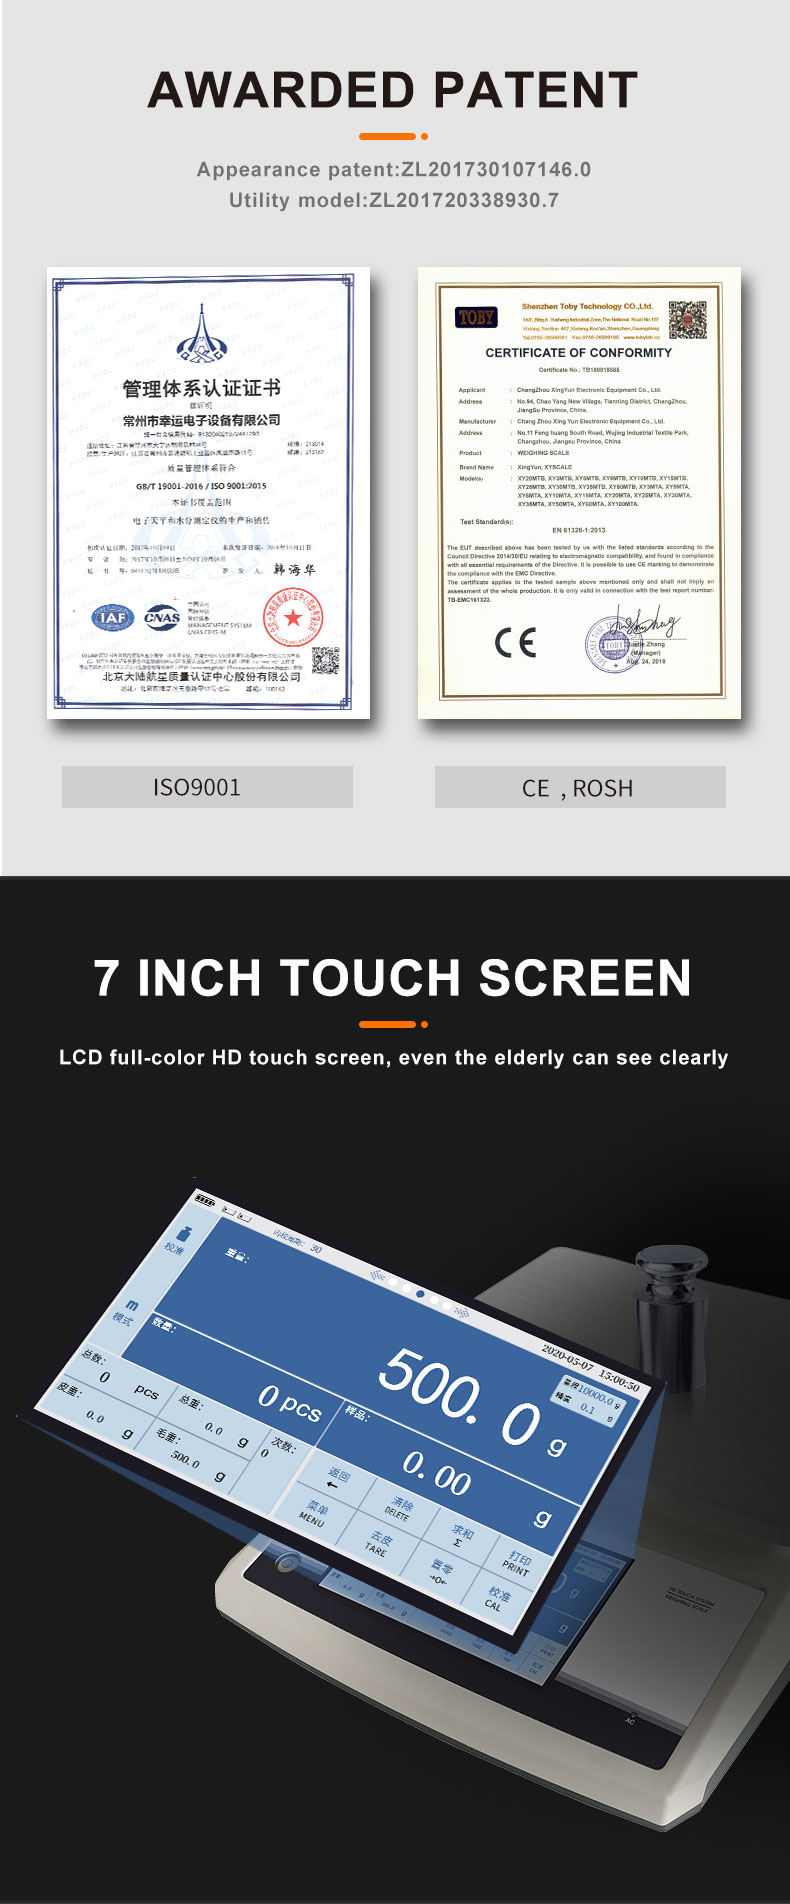 Hd5f3c0439b084fc9b42cc99d9b04d1b3R - multifunctional electronic scale touch screen